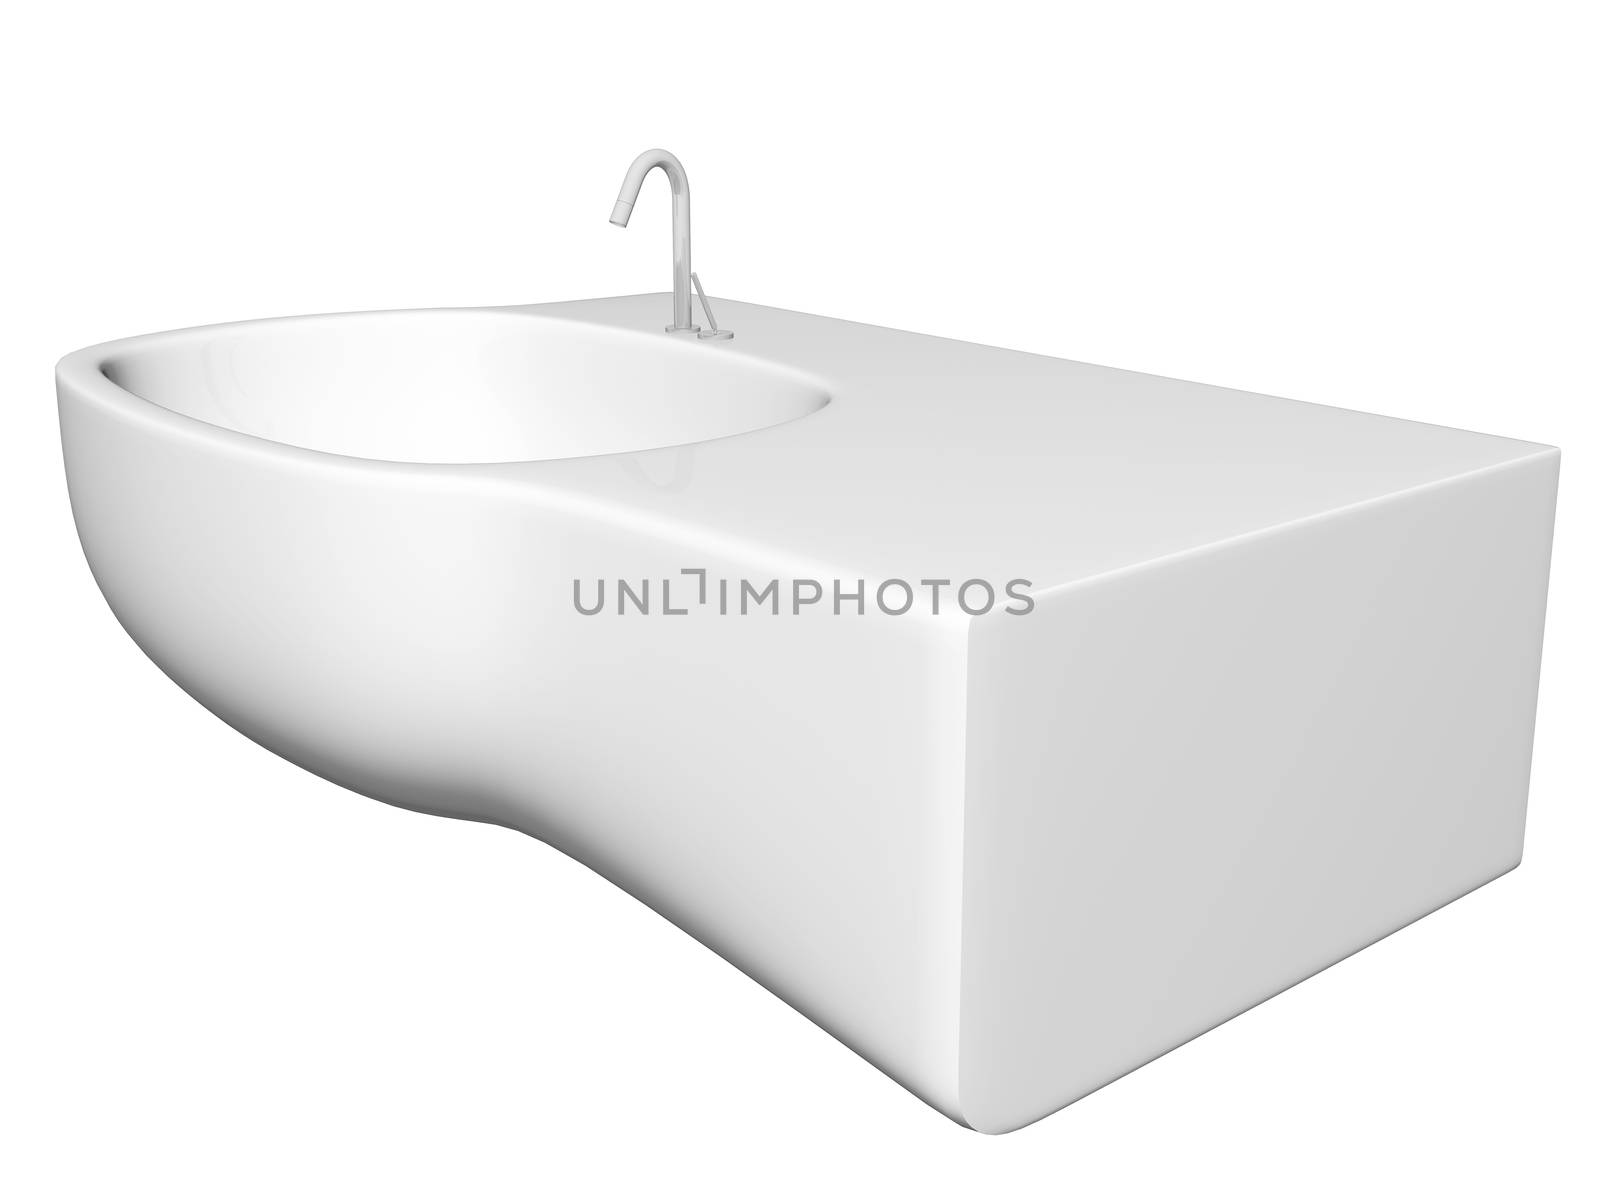 Modern washbasin or sink with faucet and plumbing fixtures, isolated against a white background.